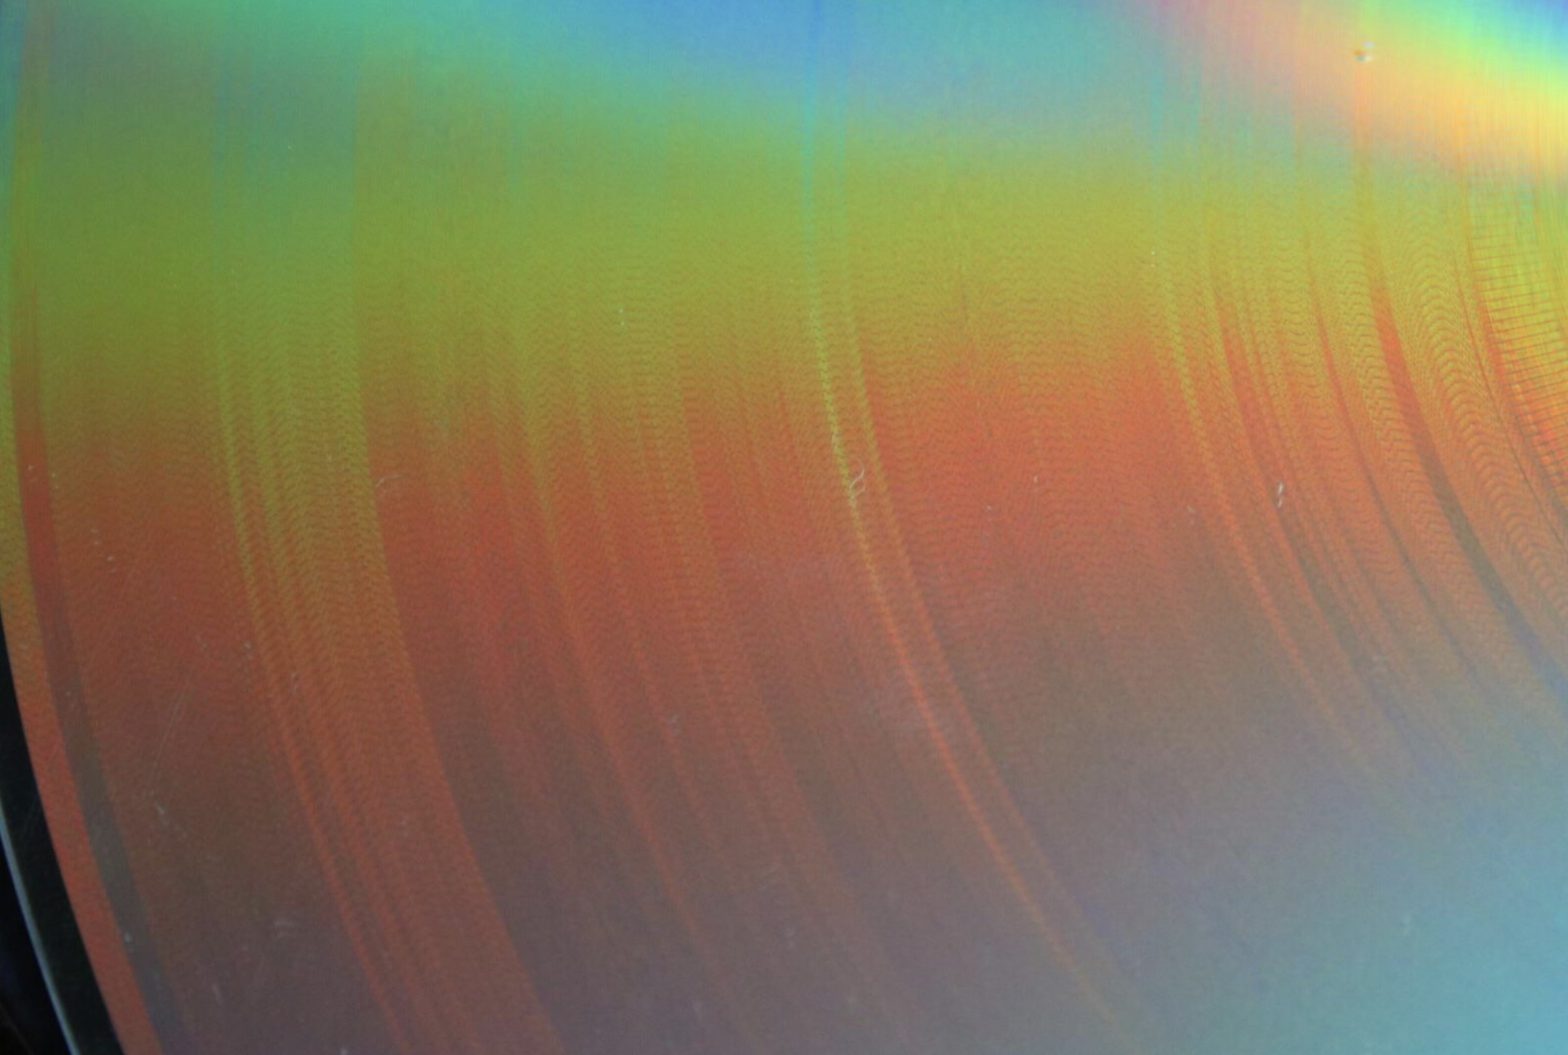 A shiny surface with a rainbow coloured refraction playing across it